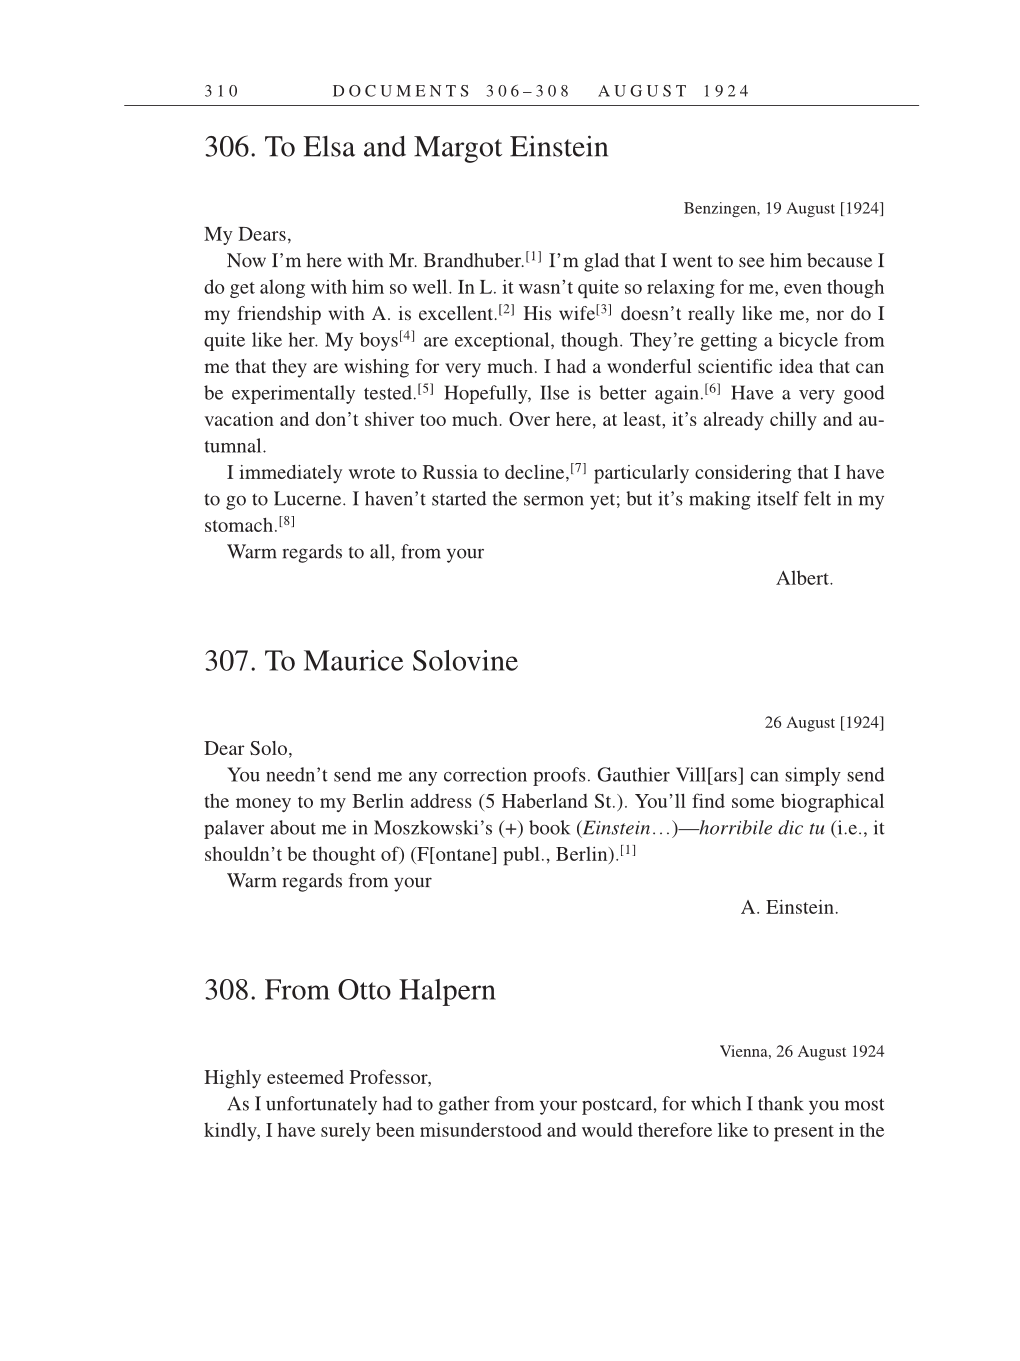 Volume 14: The Berlin Years: Writings & Correspondence, April 1923-May 1925 (English Translation Supplement) page 310